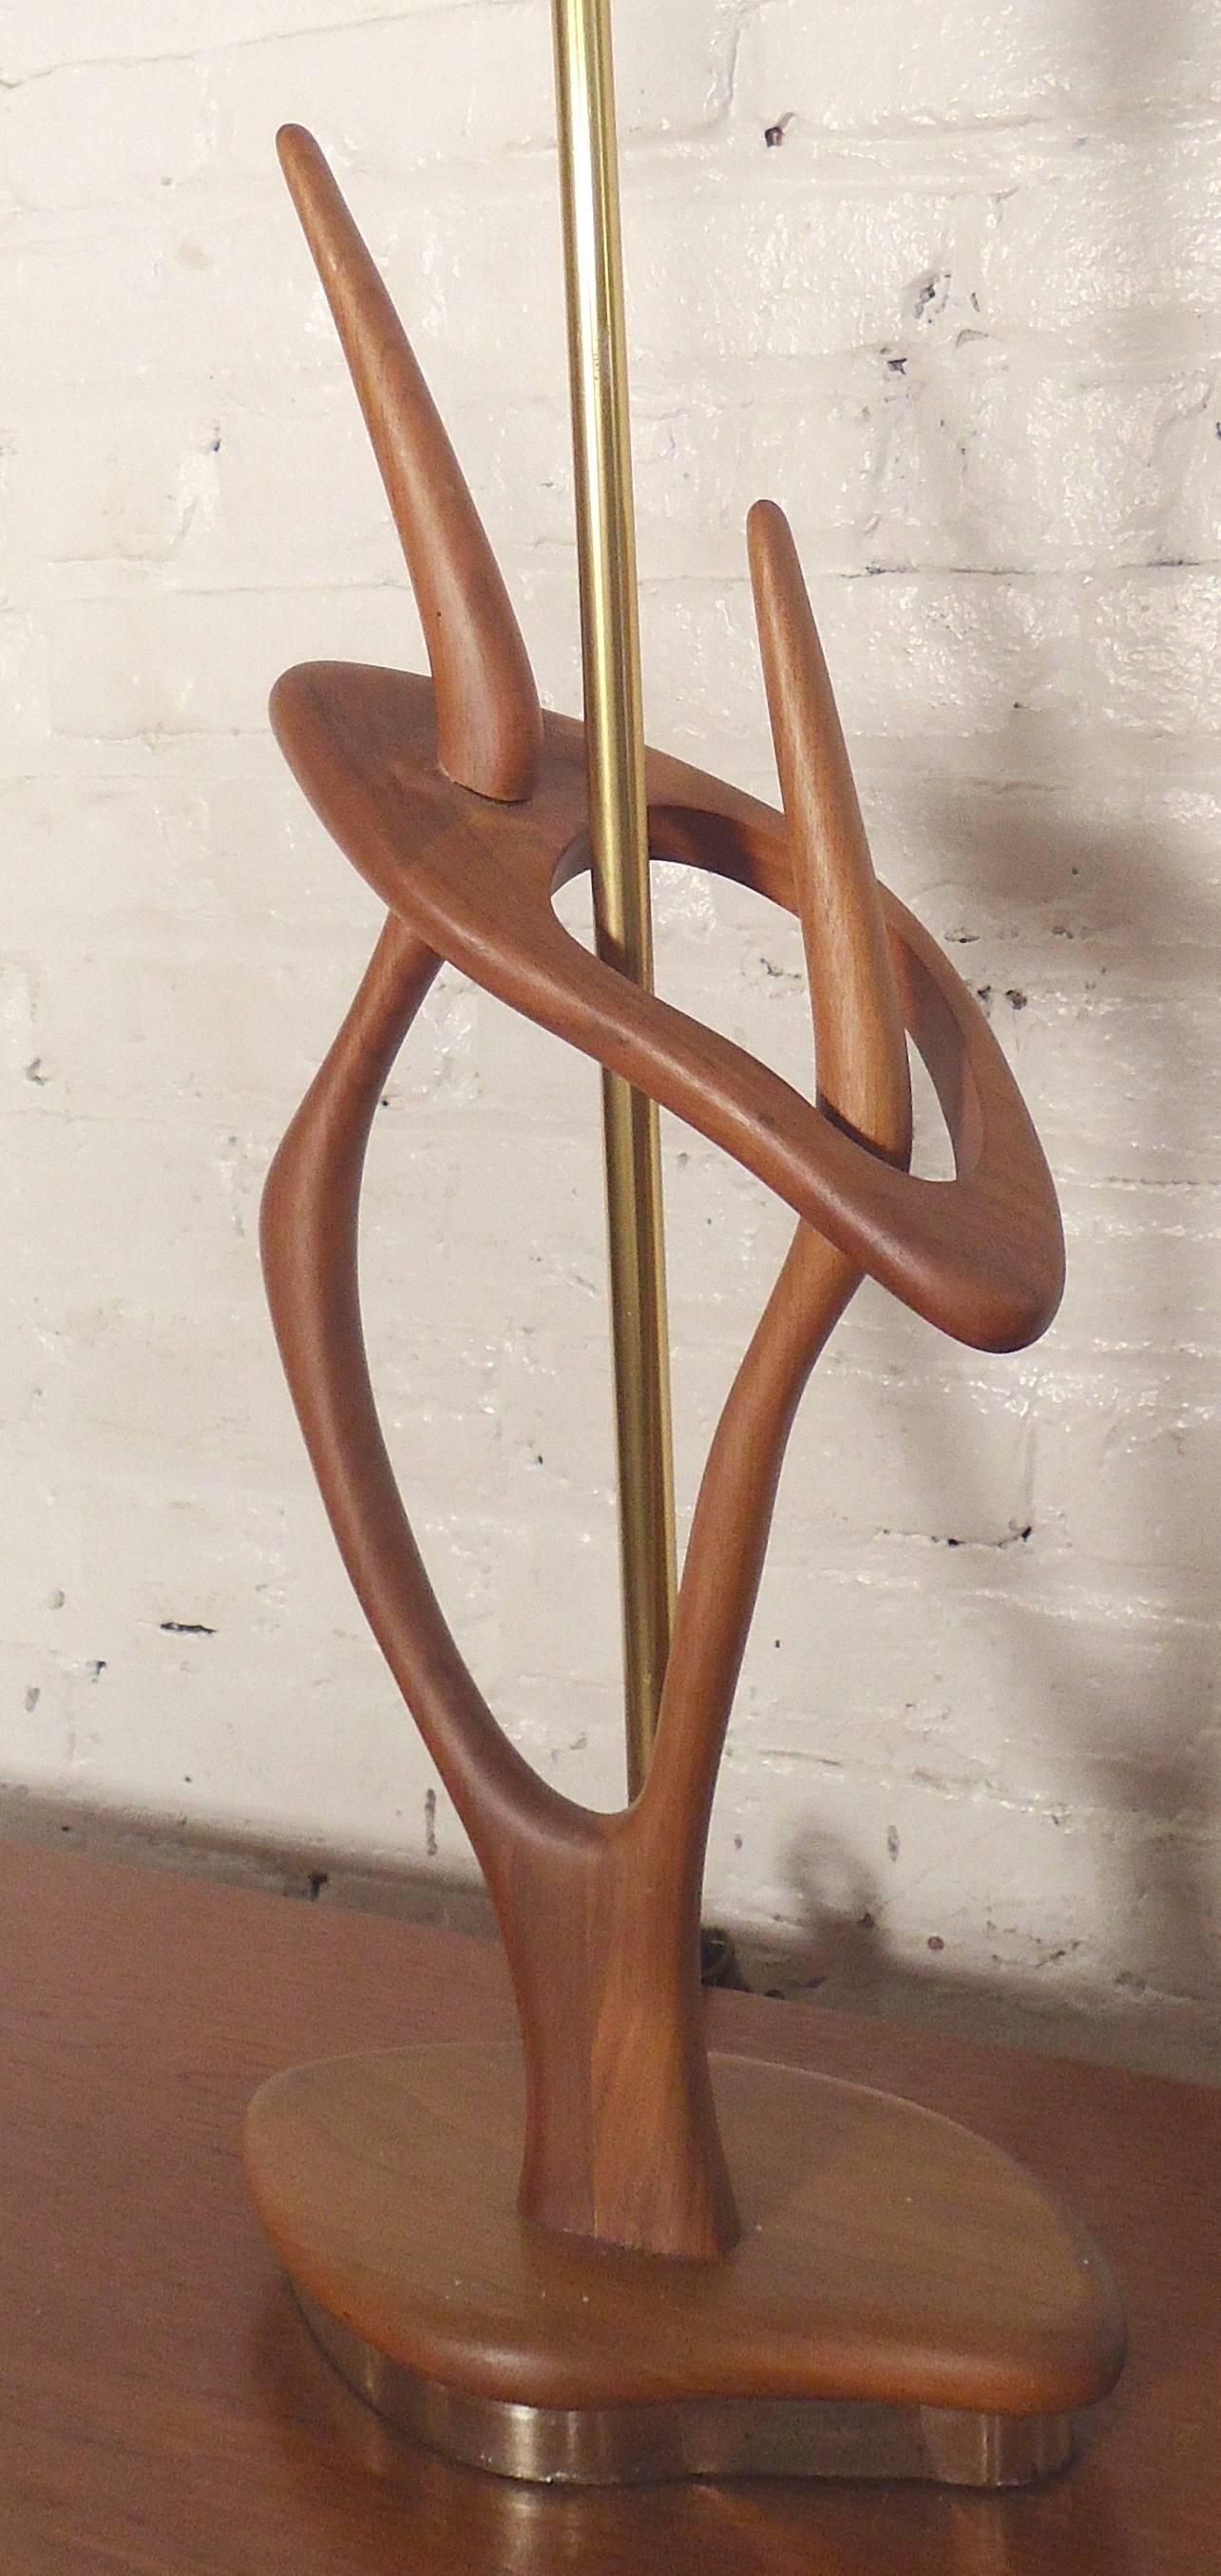 Wild table lamp in the style of the Heifetz Company. Sculpted design with brass rod and bottom accenting trim.

(Please confirm item location - NY or NJ - with dealer).
   